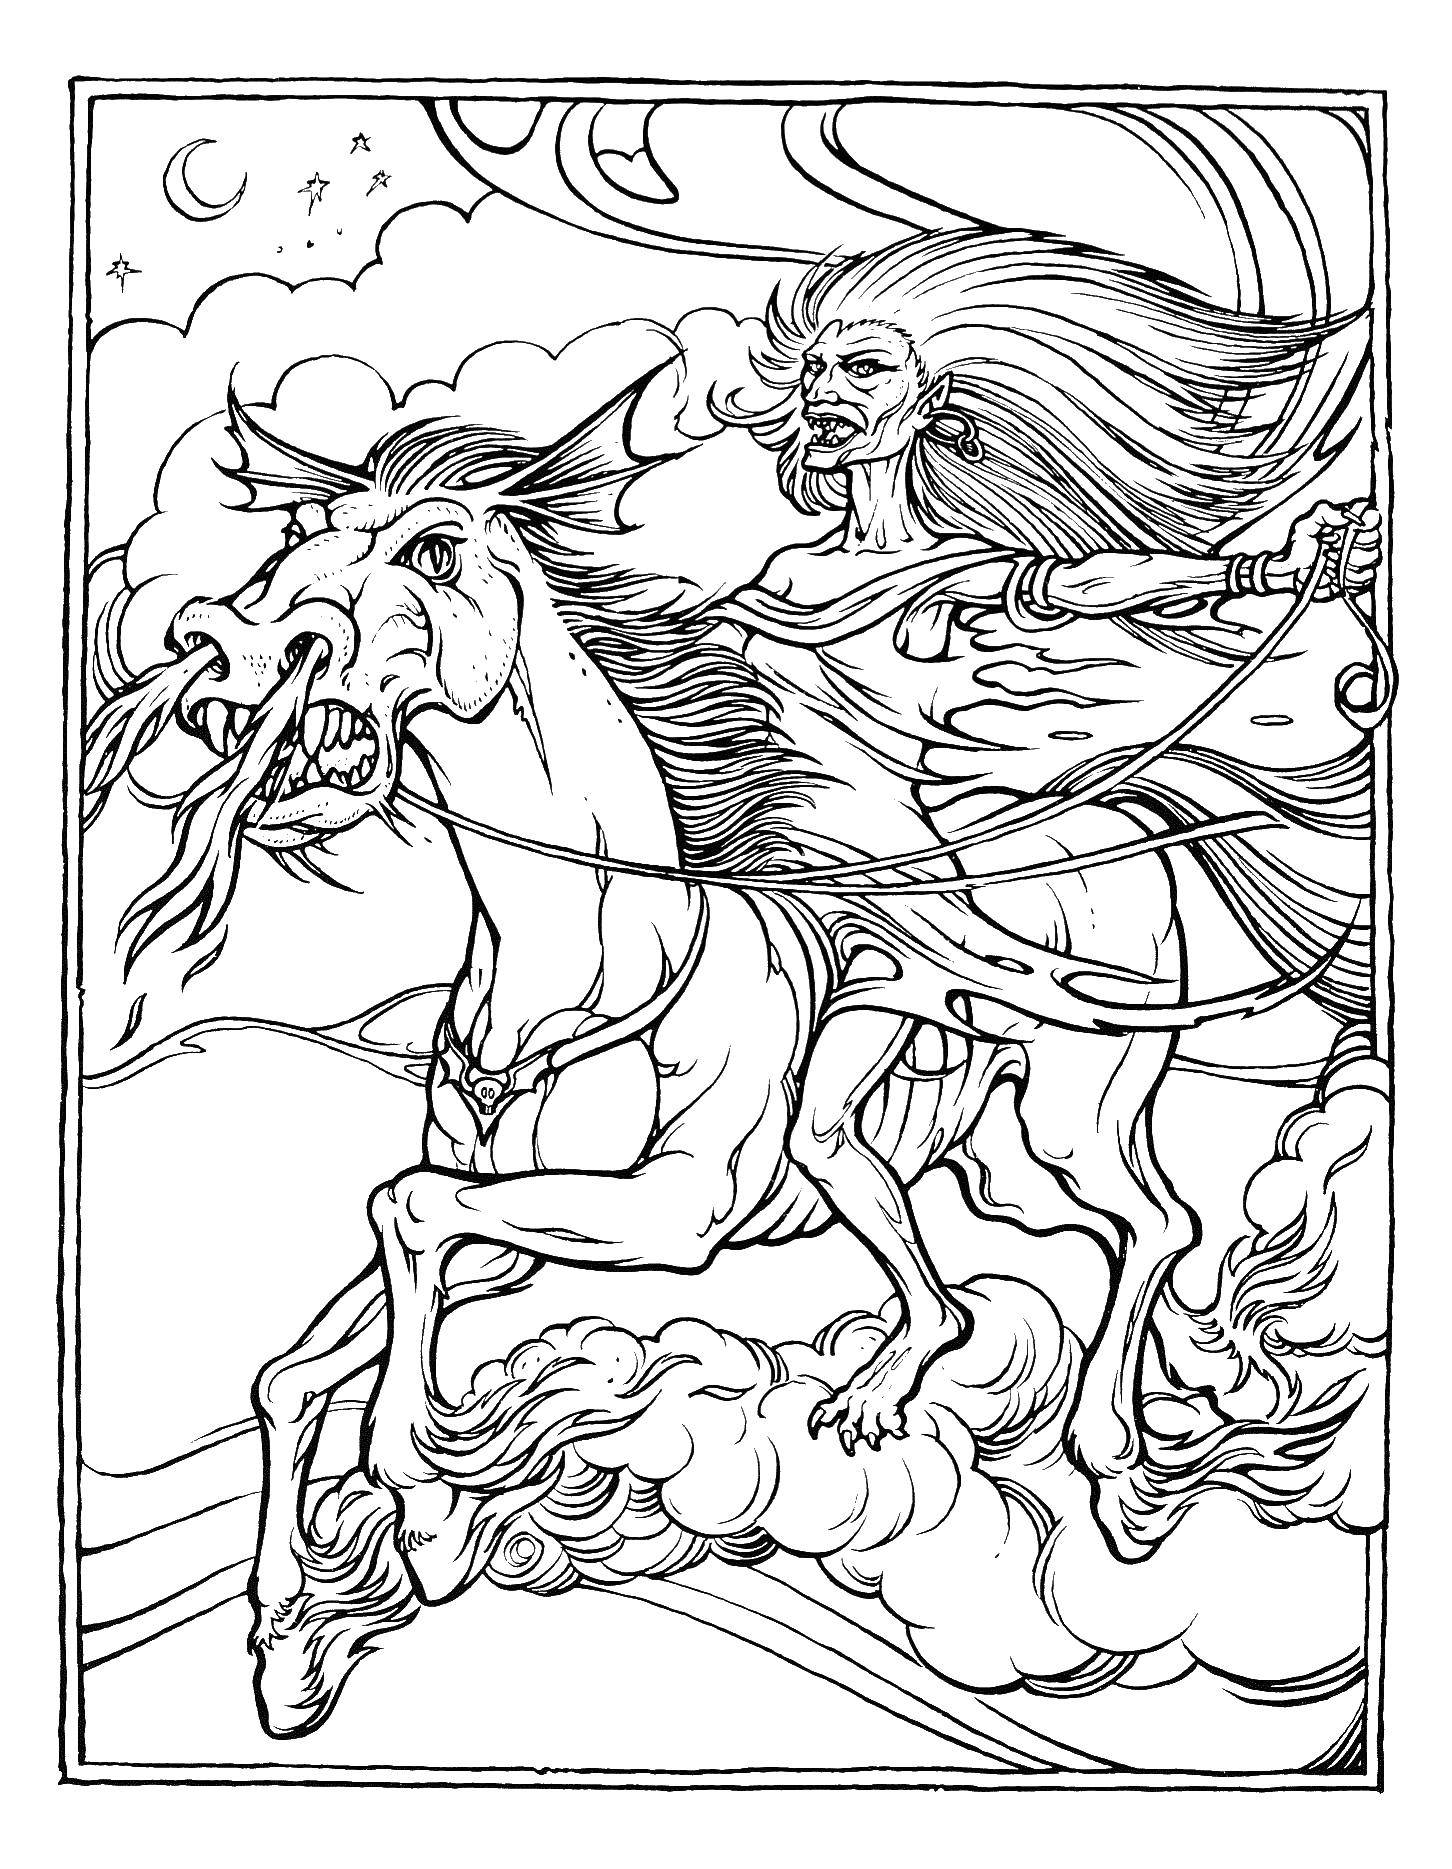 Coloring A witch on a horse. Category fiction. Tags:  witch, horse, fire.